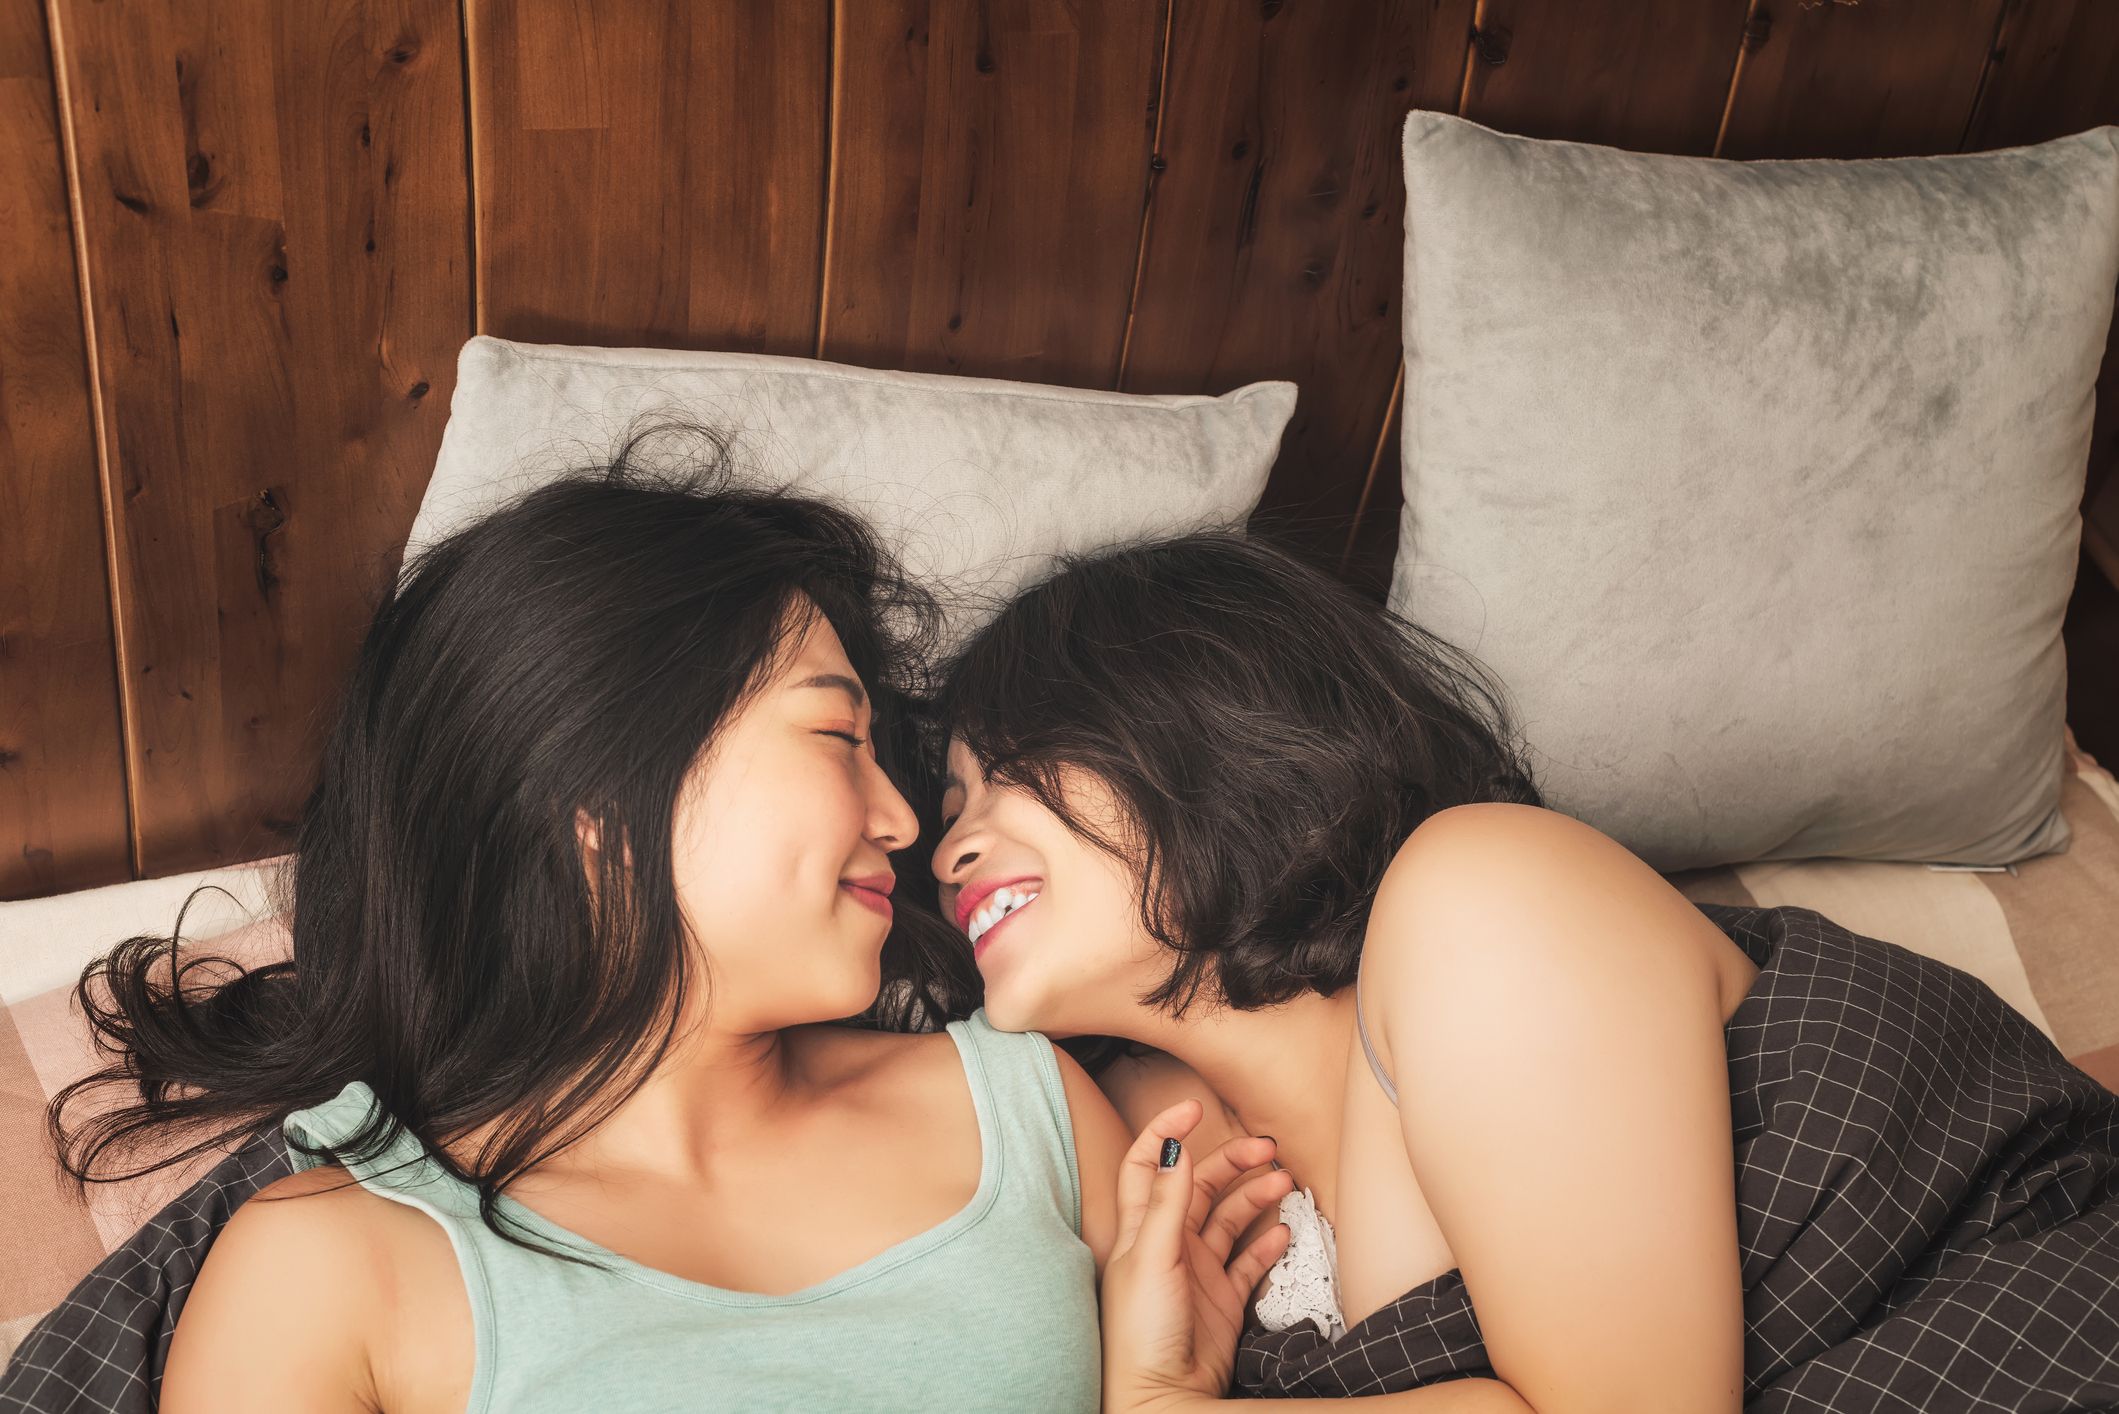 Why Straight Women May Prefer Lesbian Porn, Per Sex Therapists image